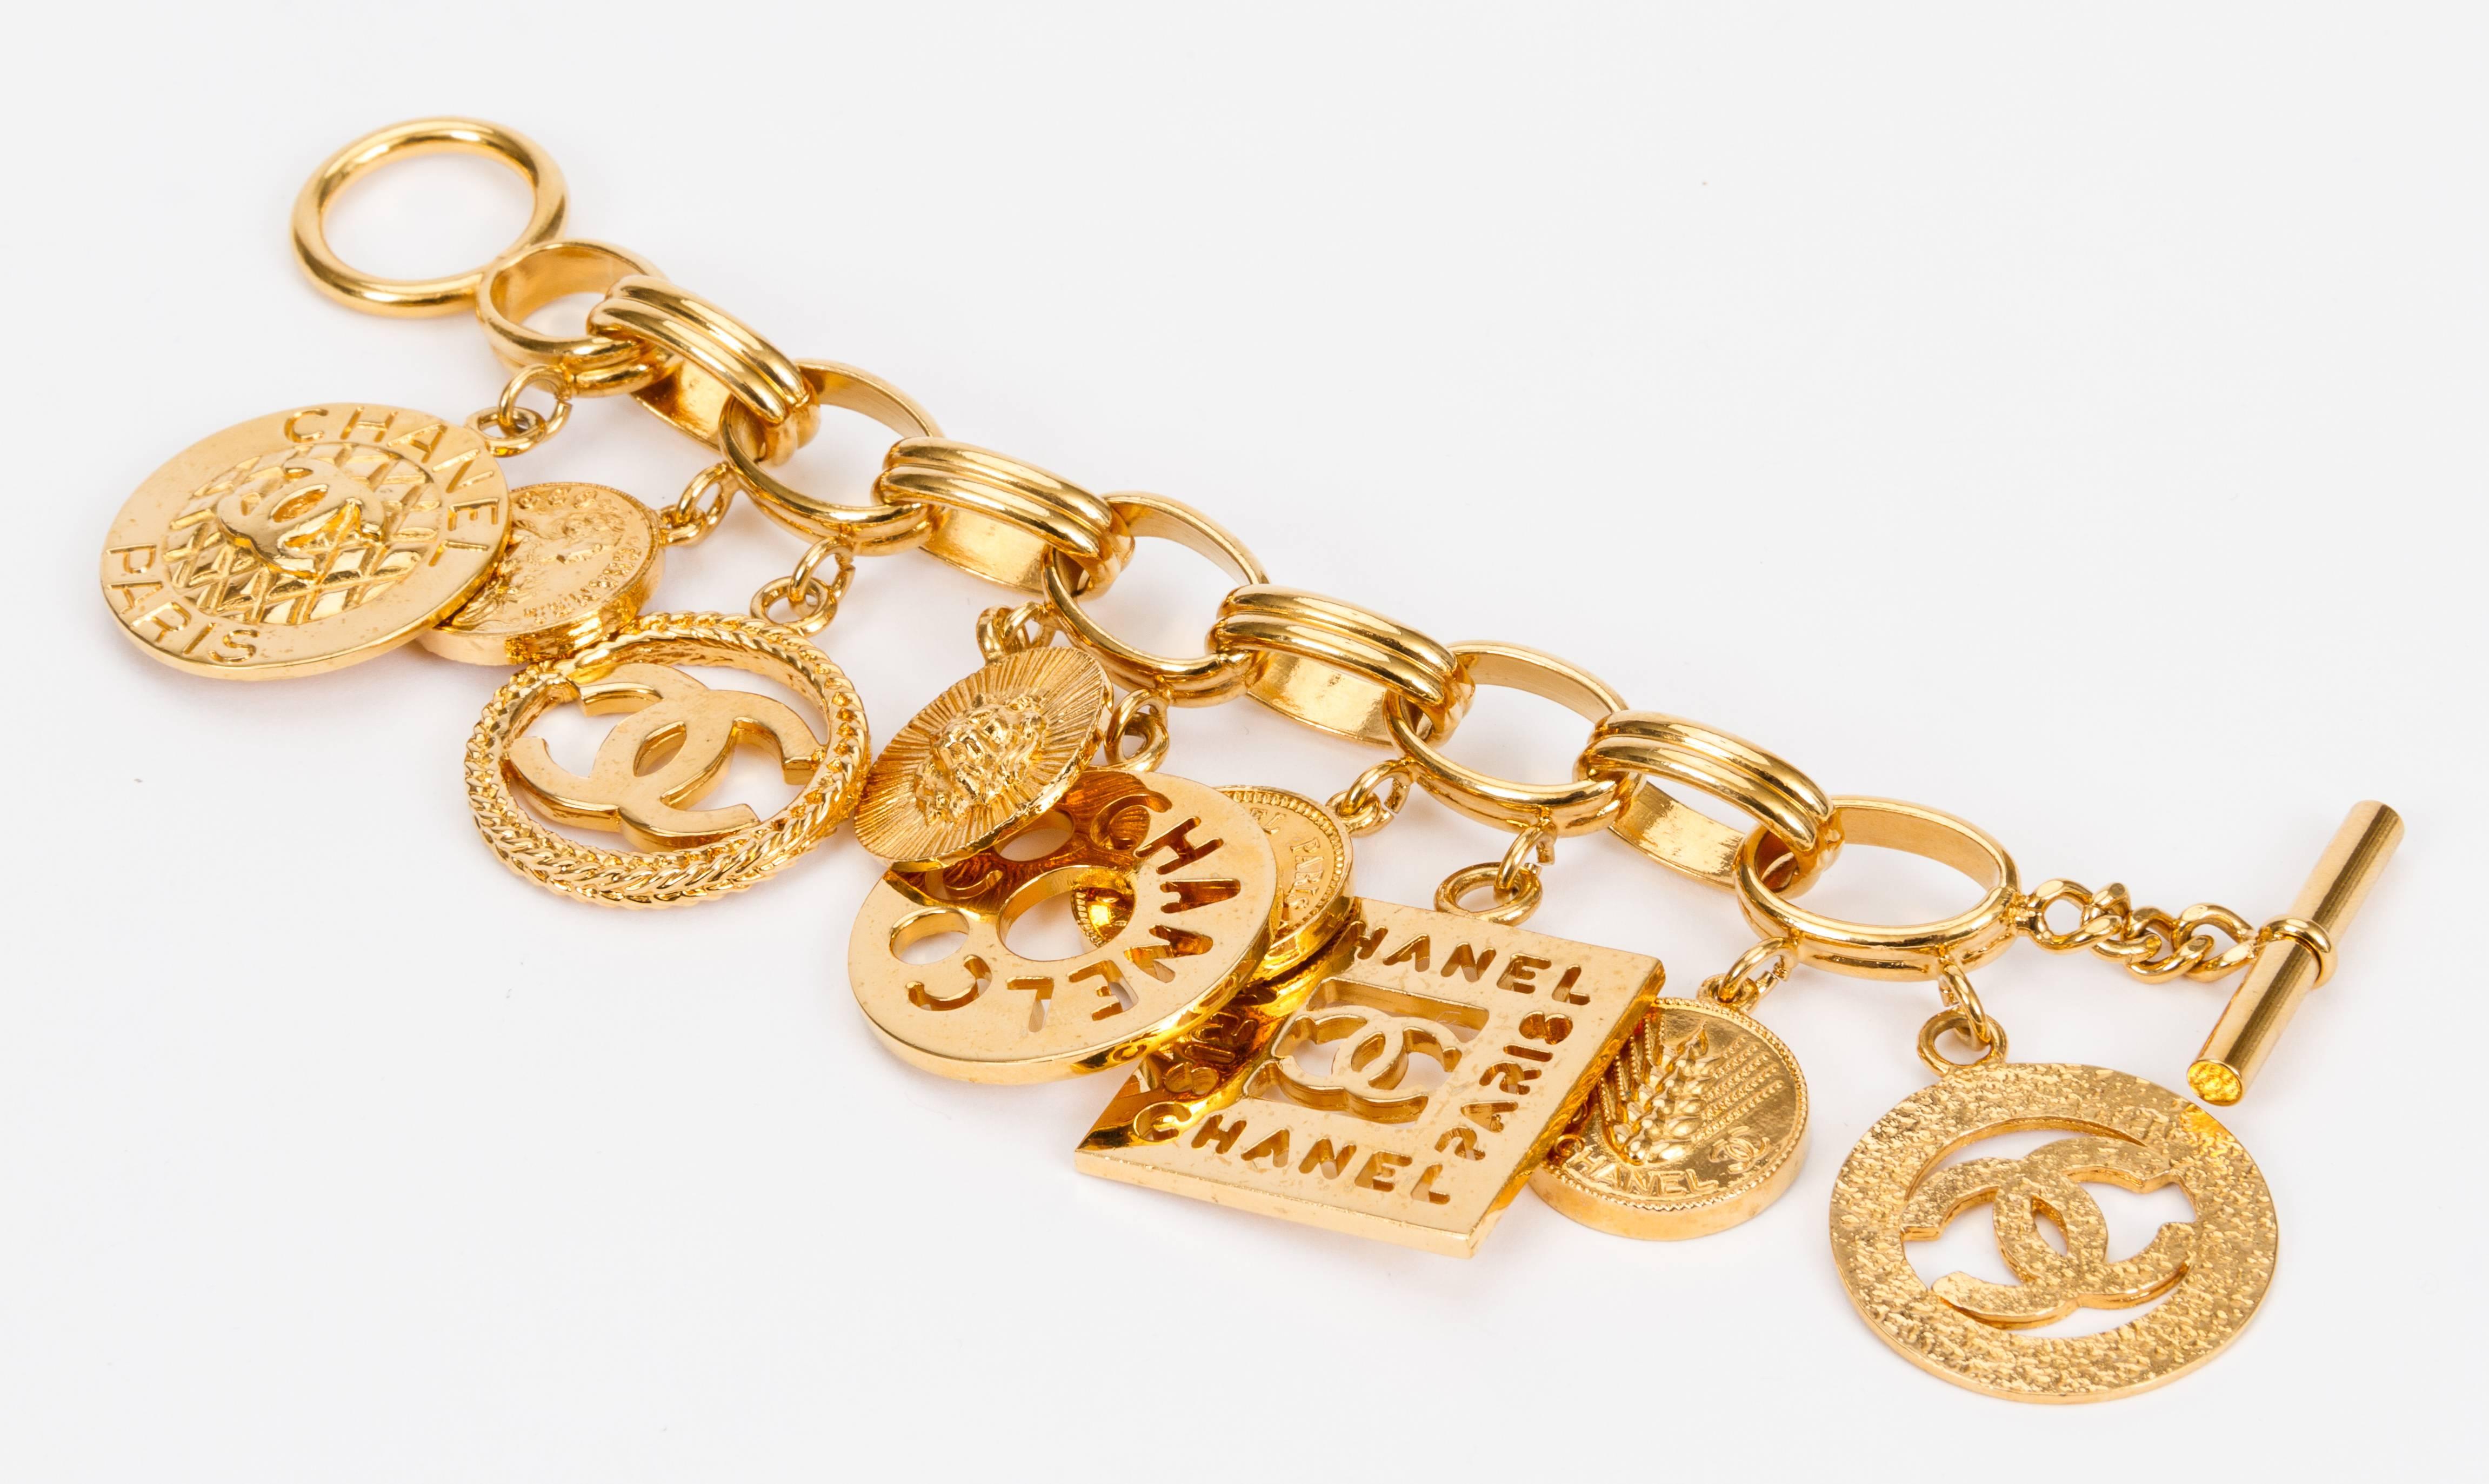 Chanel charm bracelet. Spring '93 collection. Comes with original box.
